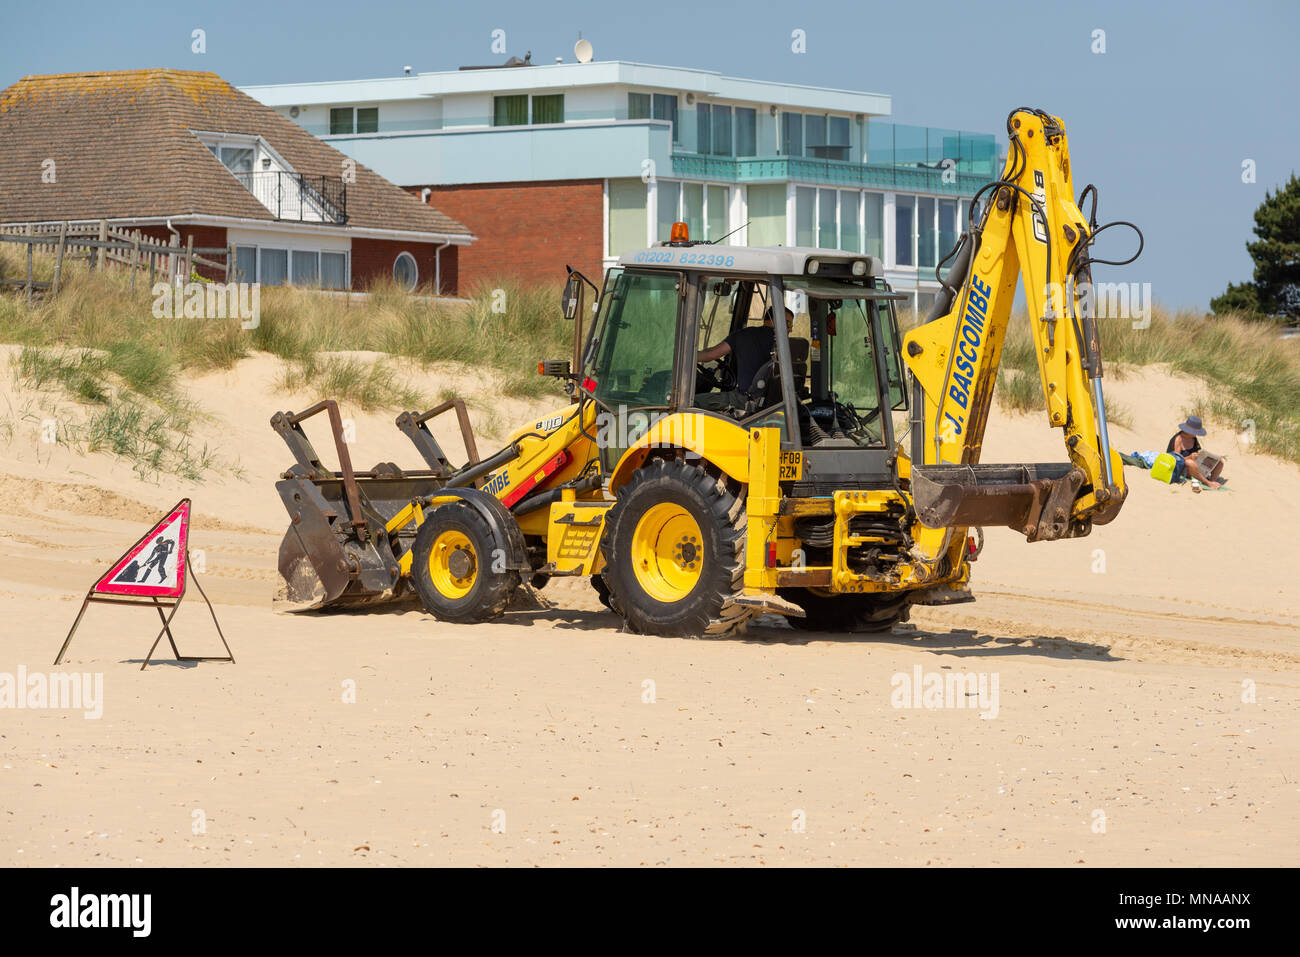 JCB digger performing sand levelling manoeuvres on the beach at Sandbanks, Poole, Dorset, UK Stock Photo